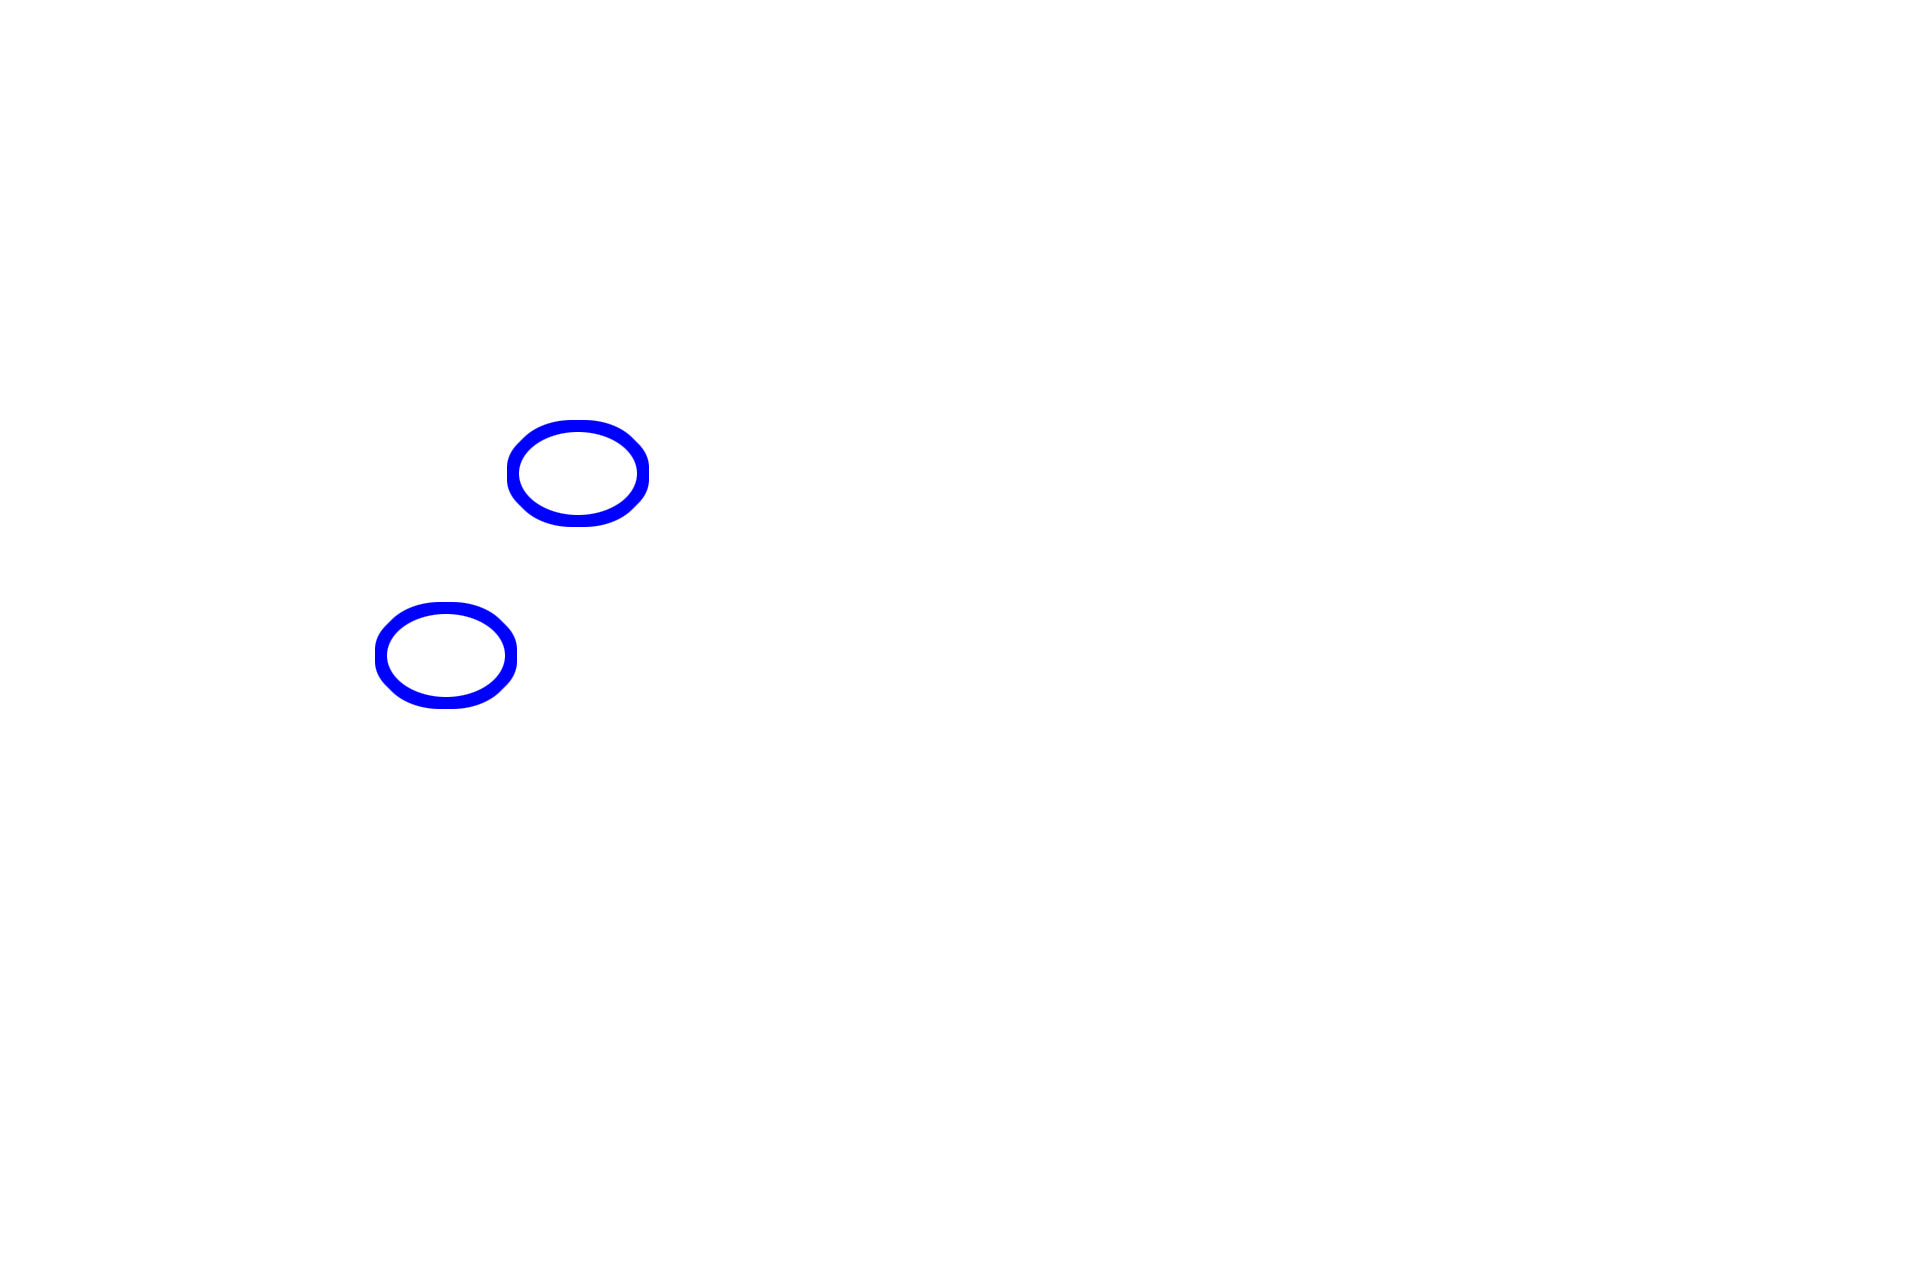 Centrosomes <p>During metaphase, paired homologous chromosomes, which are still joined by chiasmata, align at the metaphase plate.  These pairs, consisting of four chromatids, are called bivalents.  As in mitosis, the centrosomes have migrated to opposite poles of the cell and the mitotic spindle is complete.</p>
